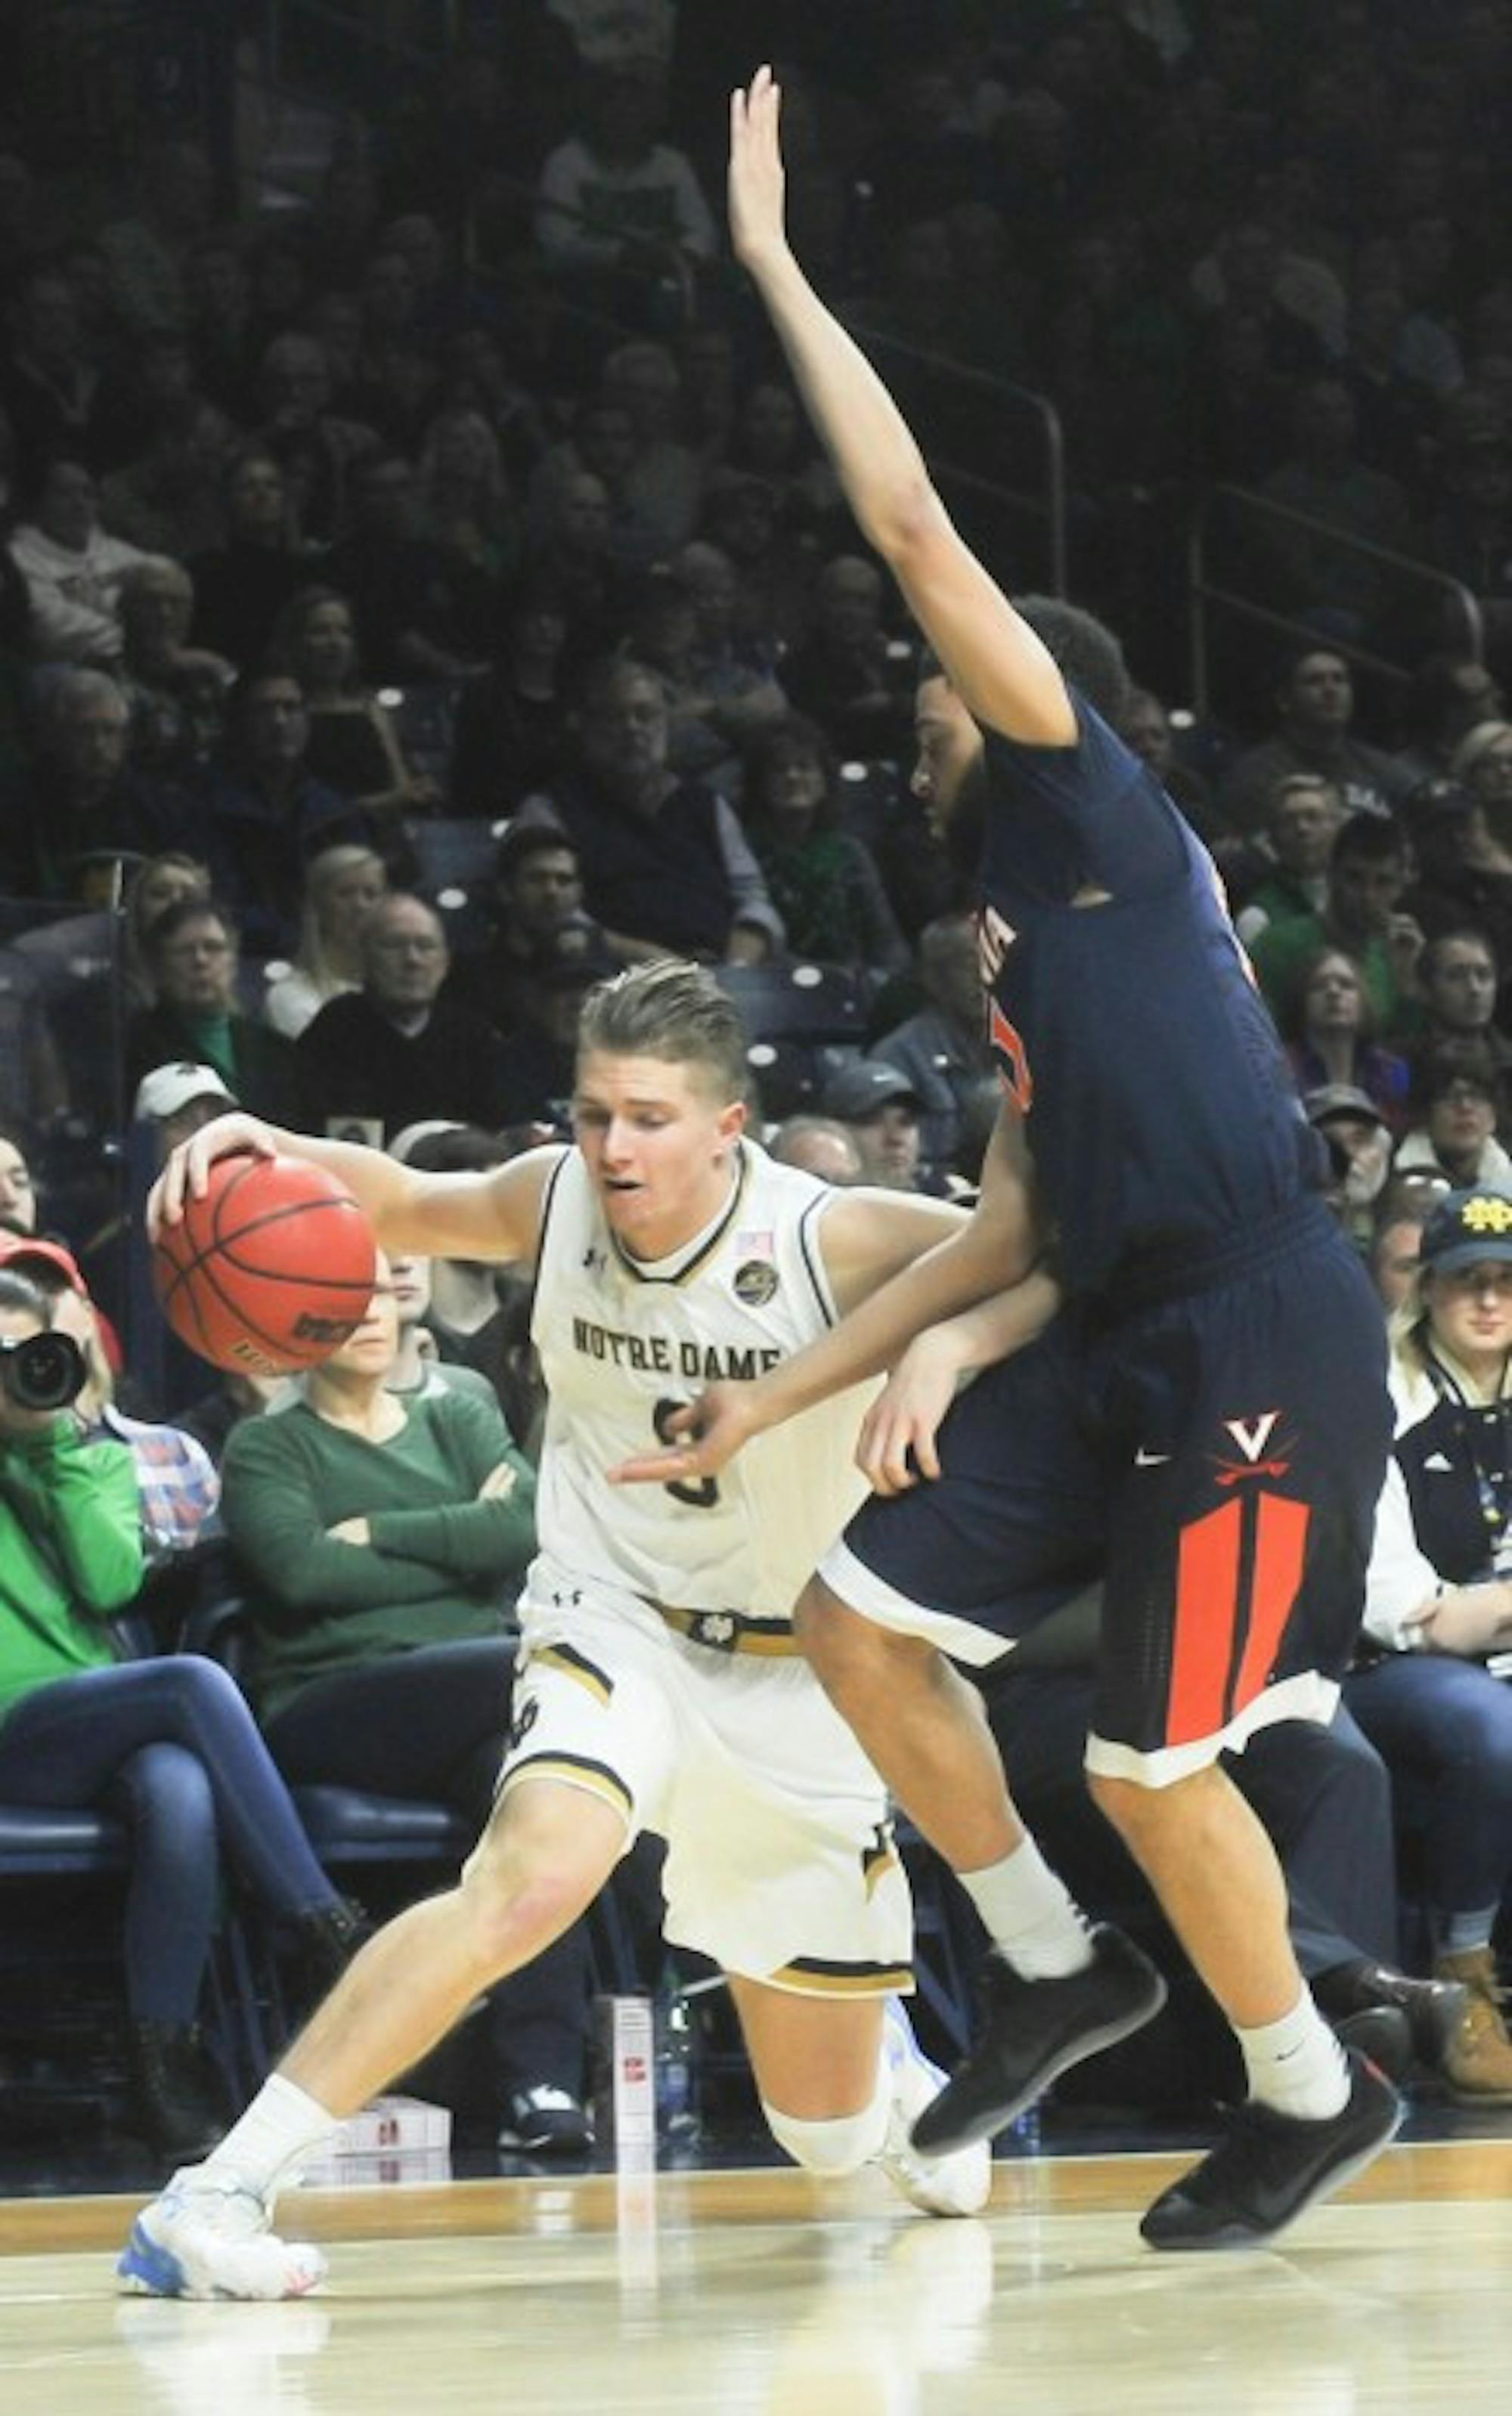 Irish sophomore guard looks to get by the Cavalier defender during Notre Dame’s 71-54 loss to Virginia on Tuesday at Purcell Pavilion.